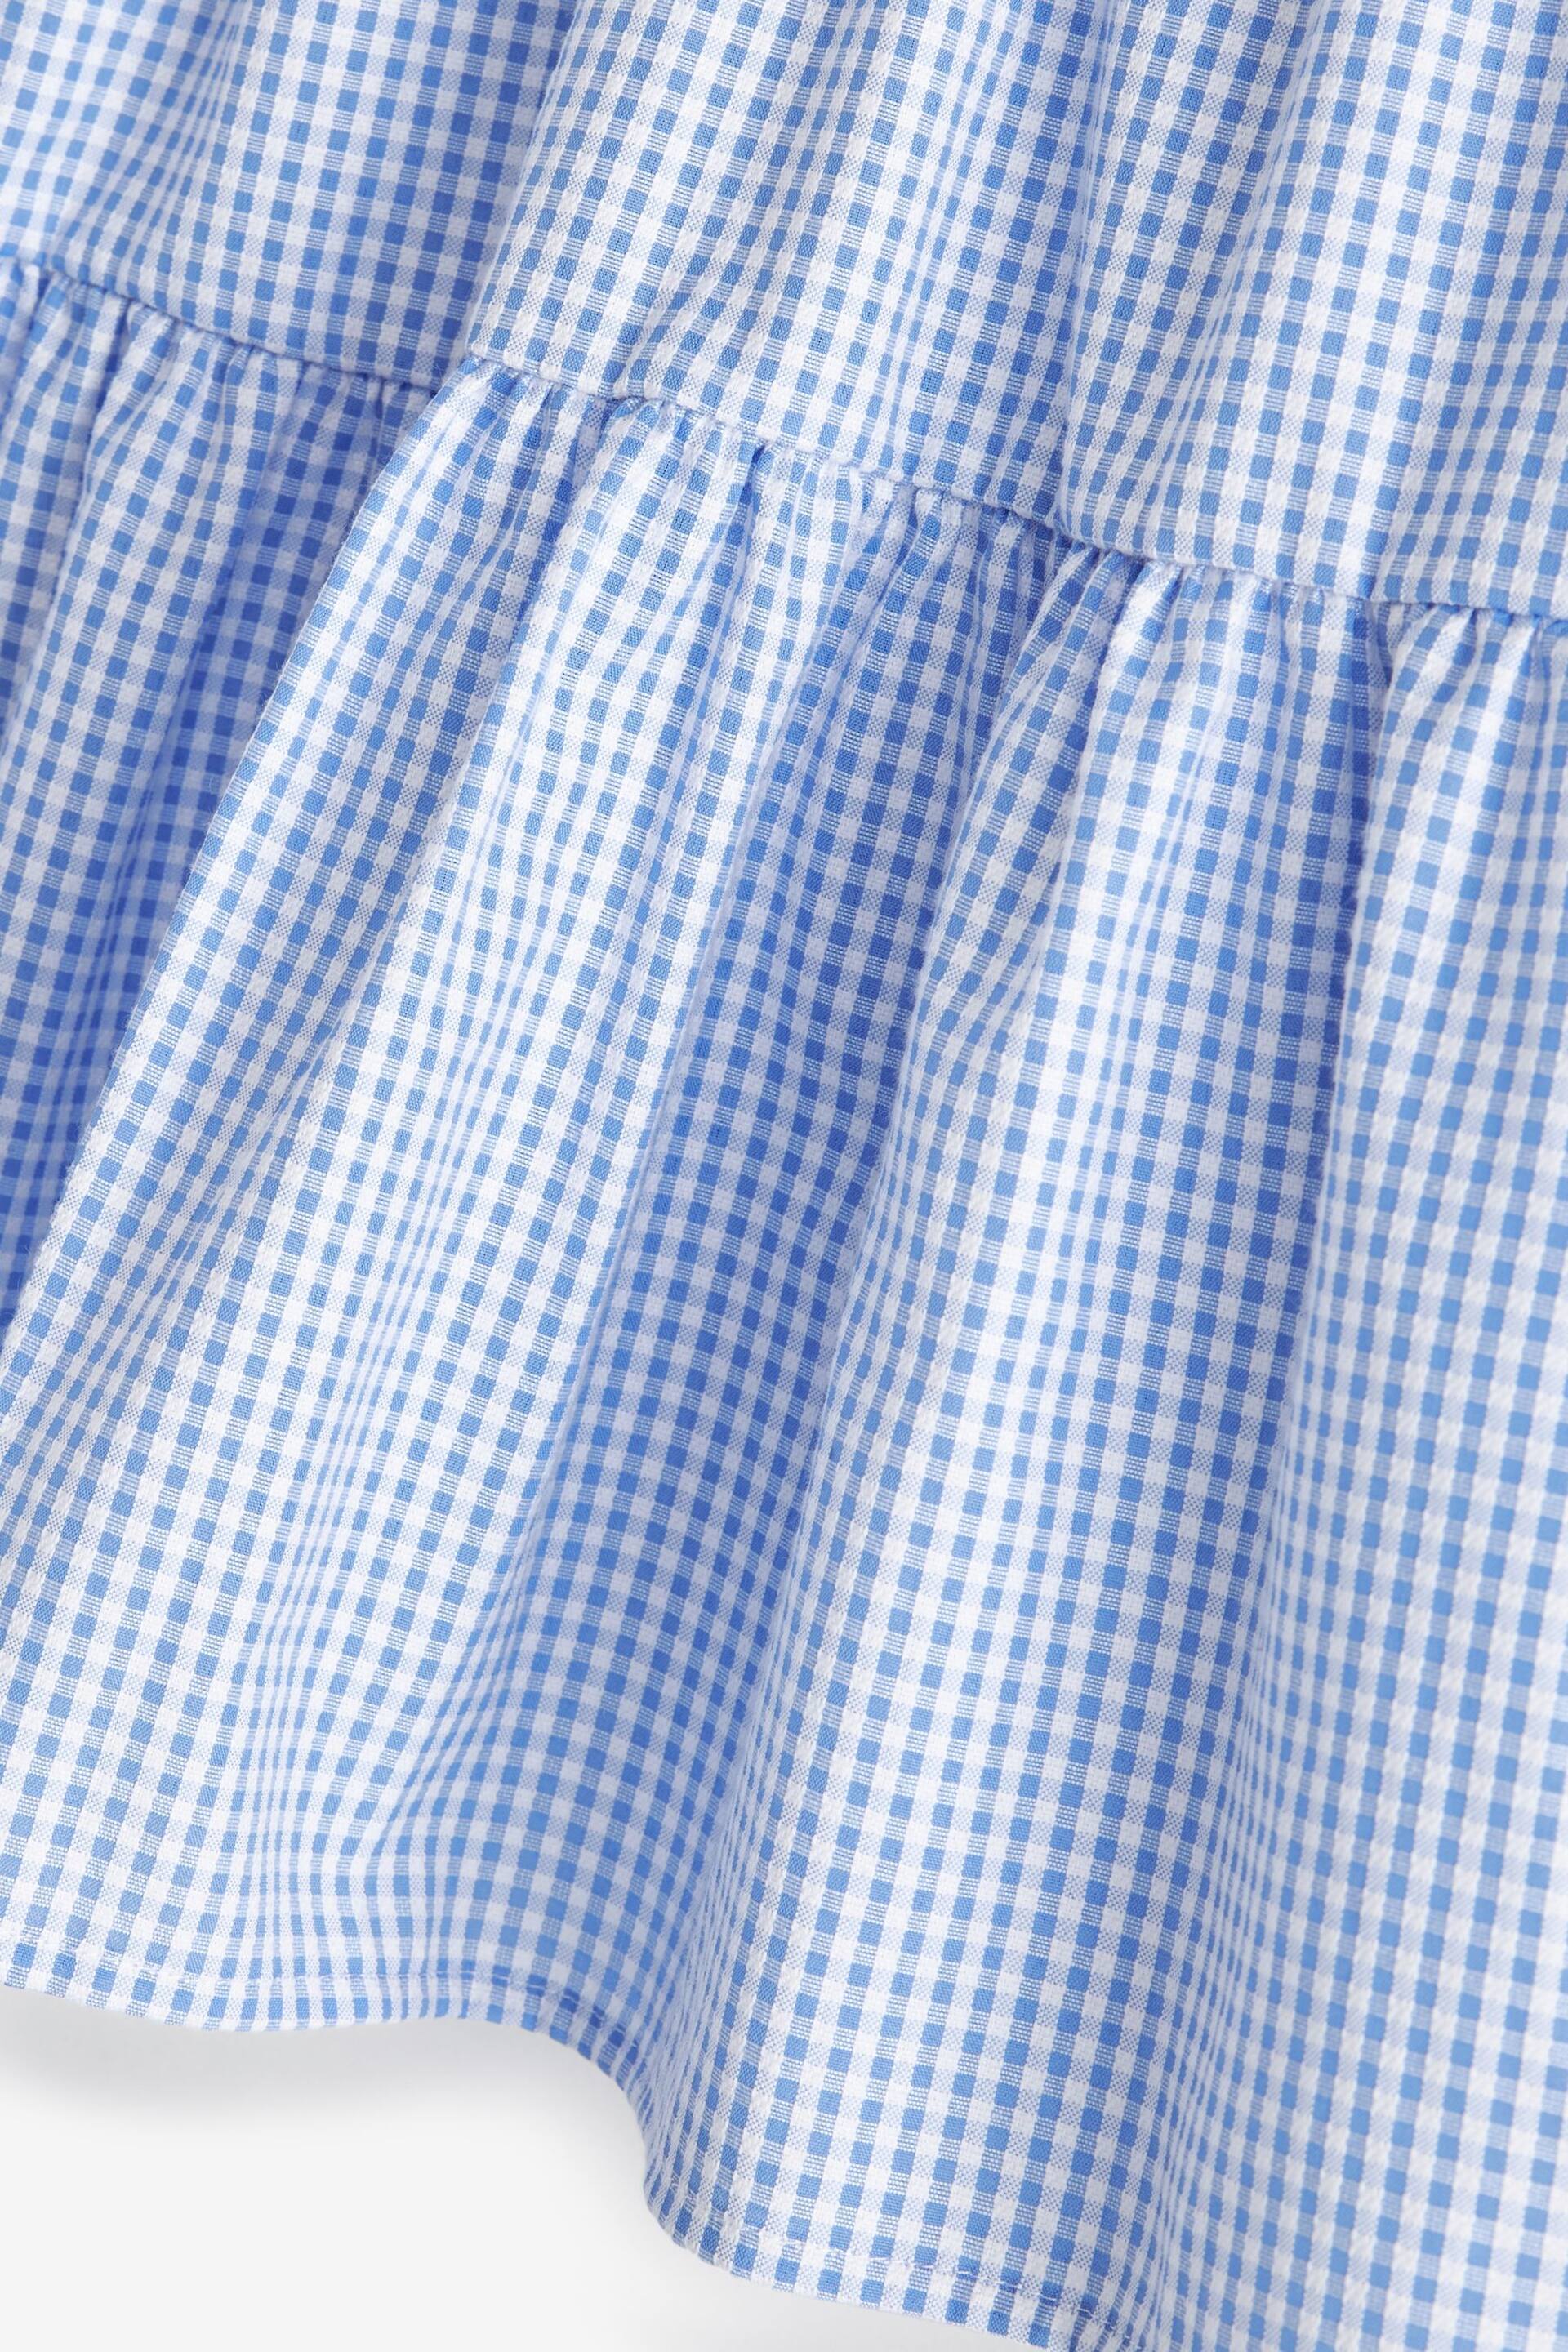 Blue Cotton Rich School Gingham Tiered Pretty Collar Dress (3-14yrs) - Image 7 of 7